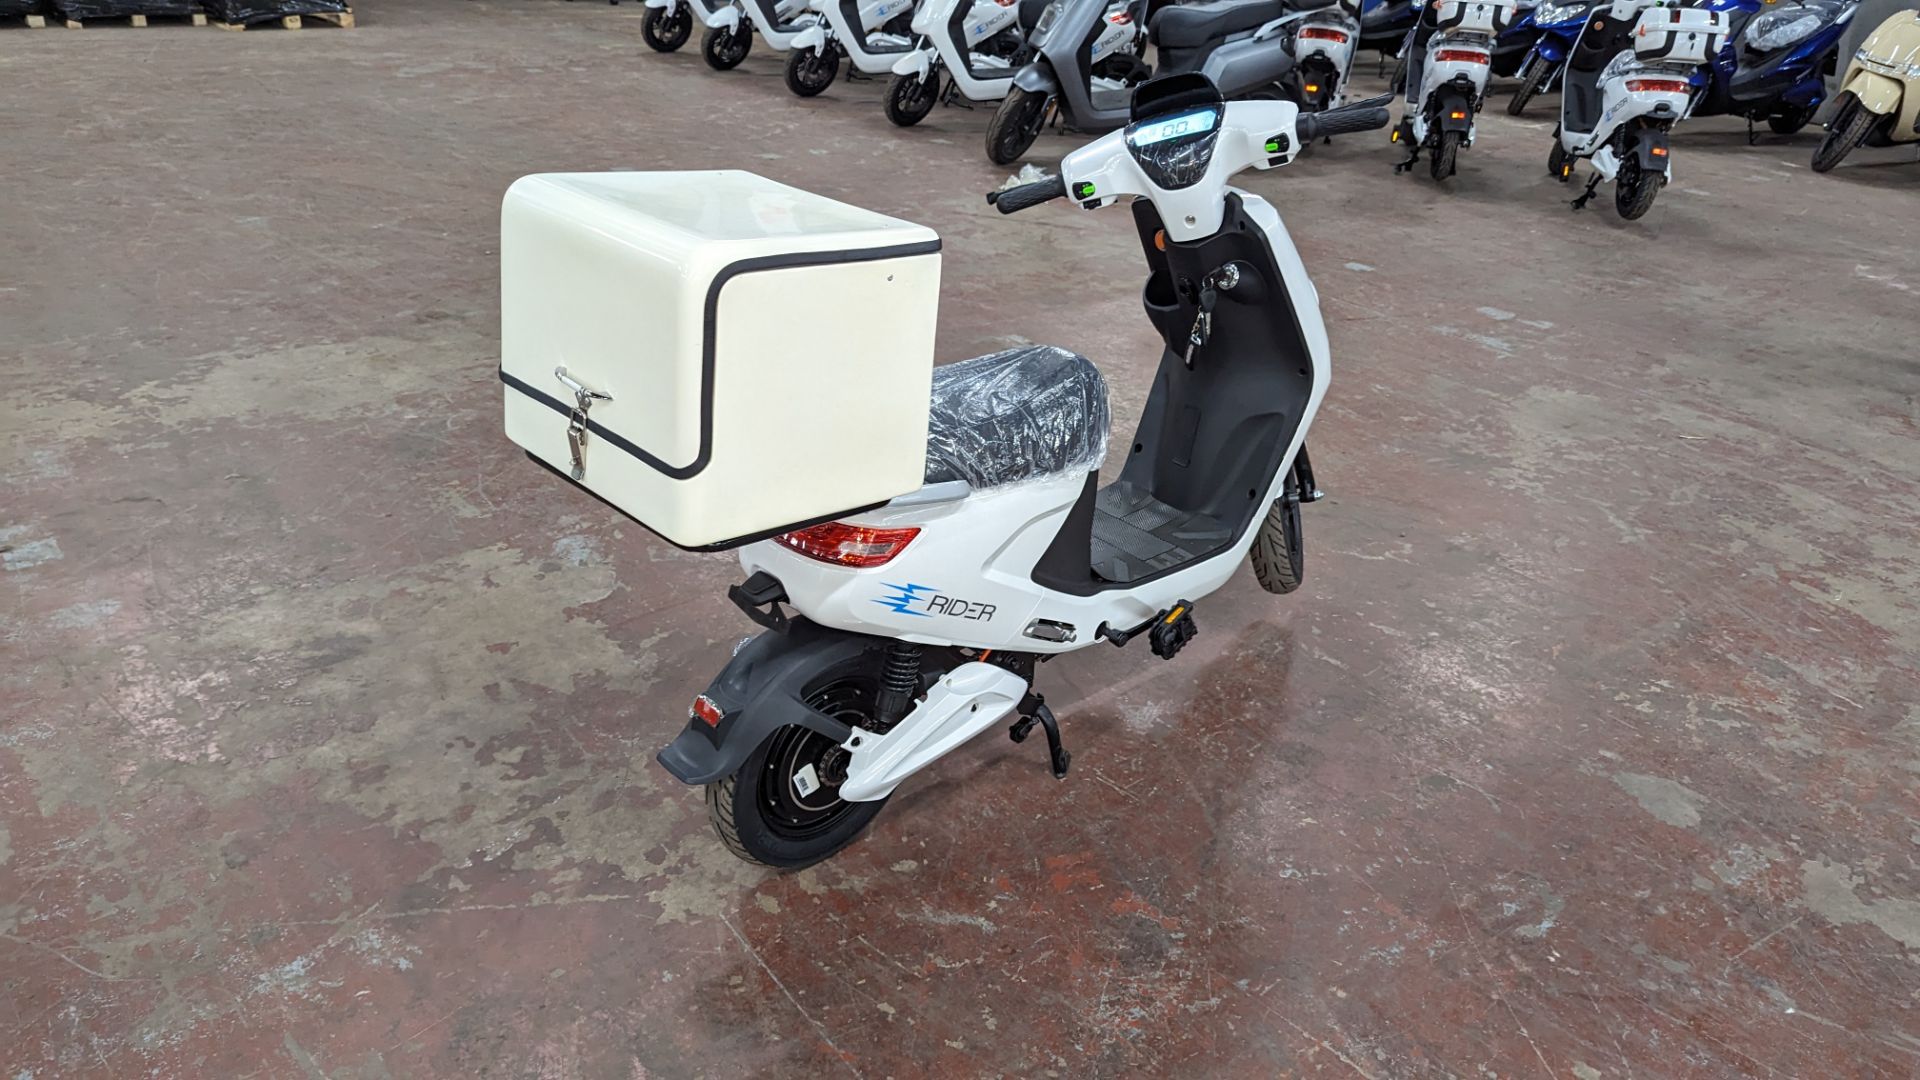 Model 18 Electric Bike: Zero (0) recorded miles, white body with black detailing, insulated box moun - Image 6 of 13